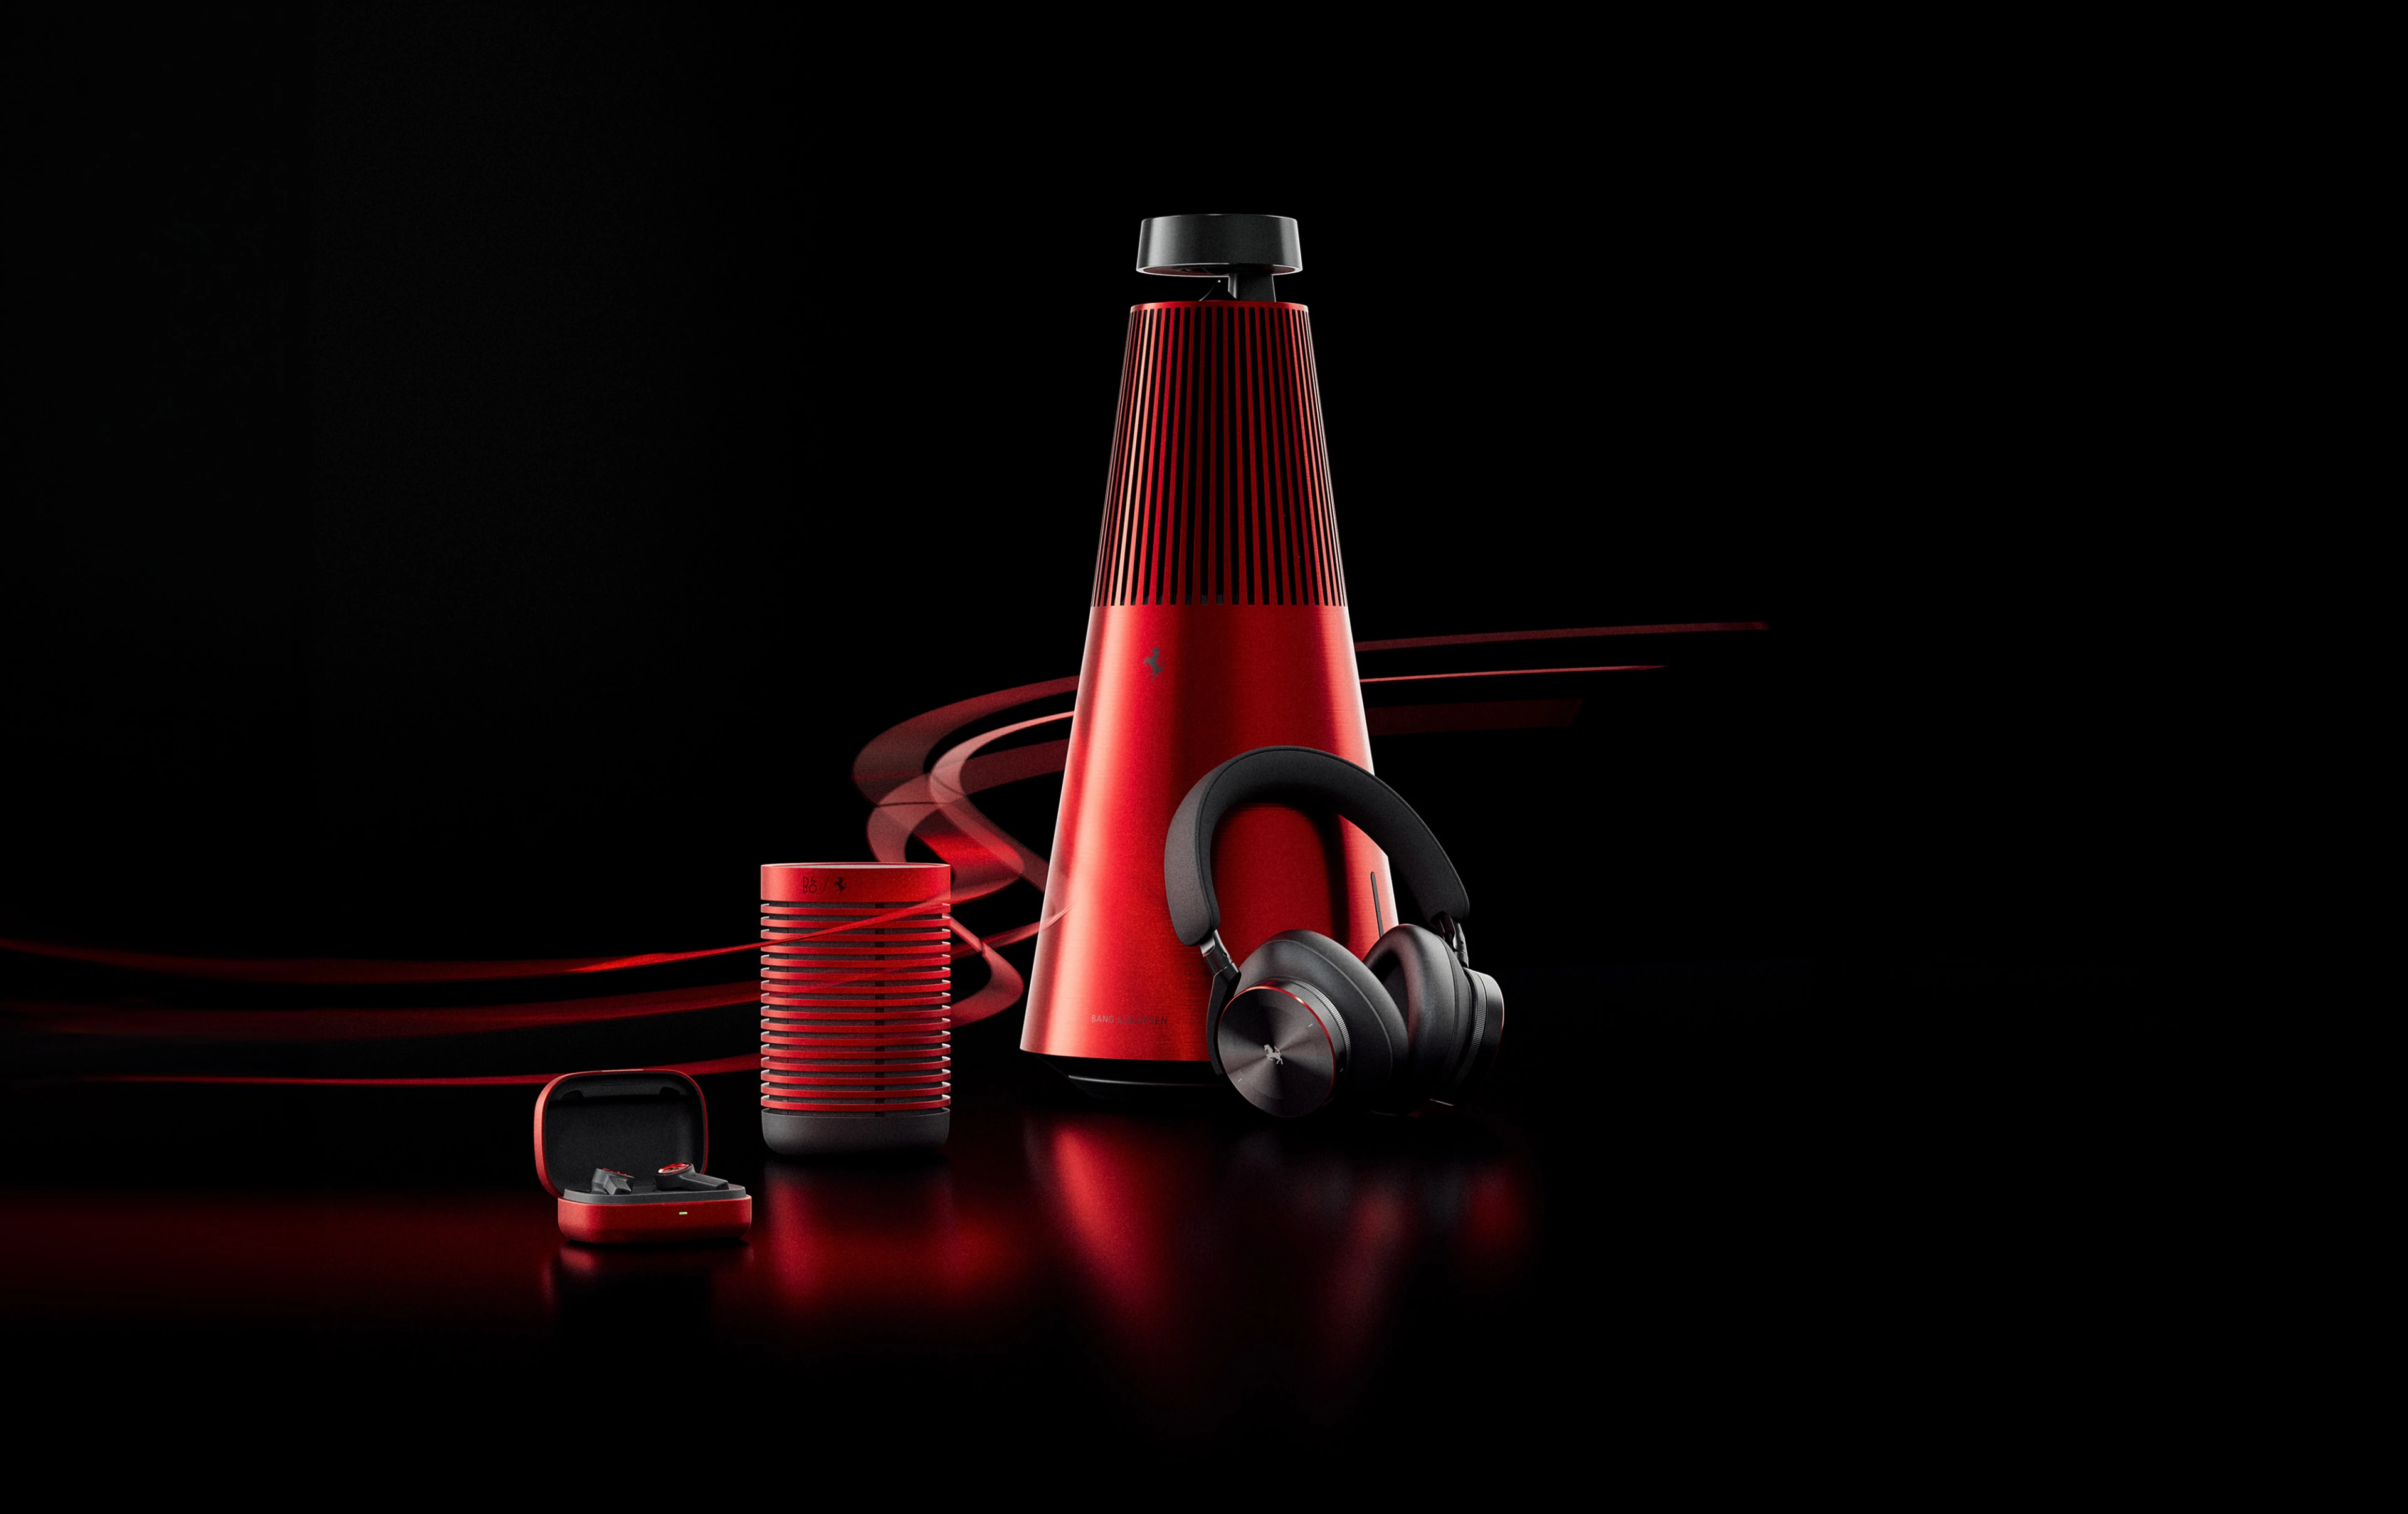 Image of the Bang & Olufsen Ferrari Collection with Beosound 2, Beosound Explore, Beoplay EX and Beoplay H95